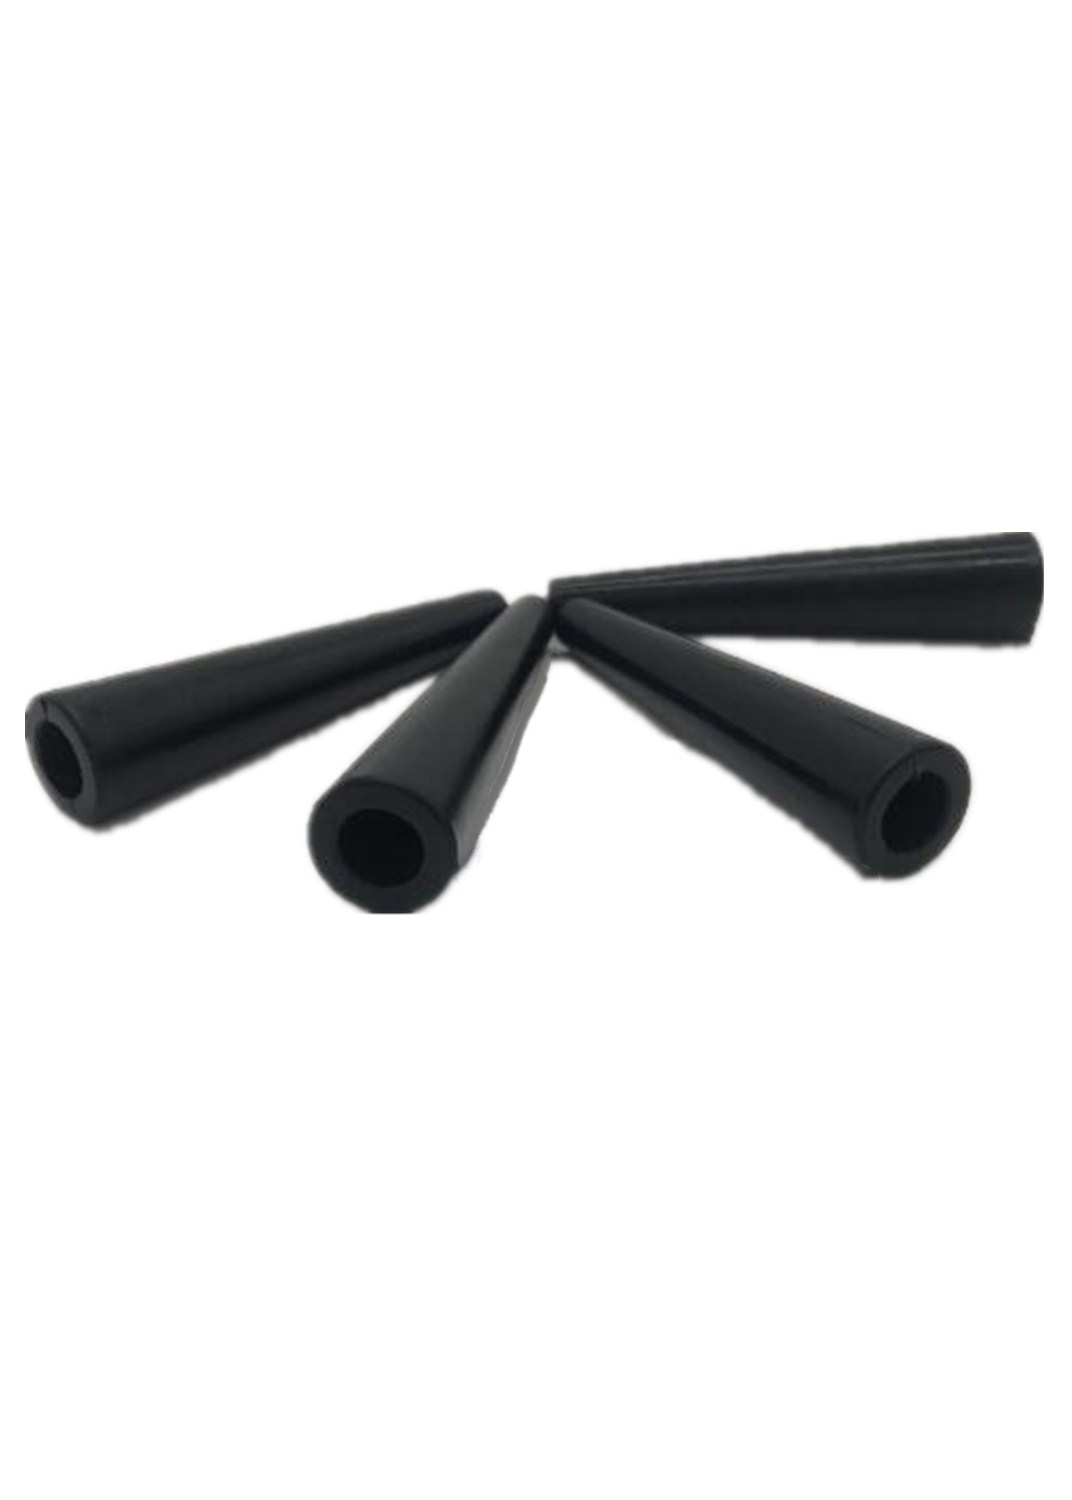 factory manufactures Conical rubber plug rubber products customized